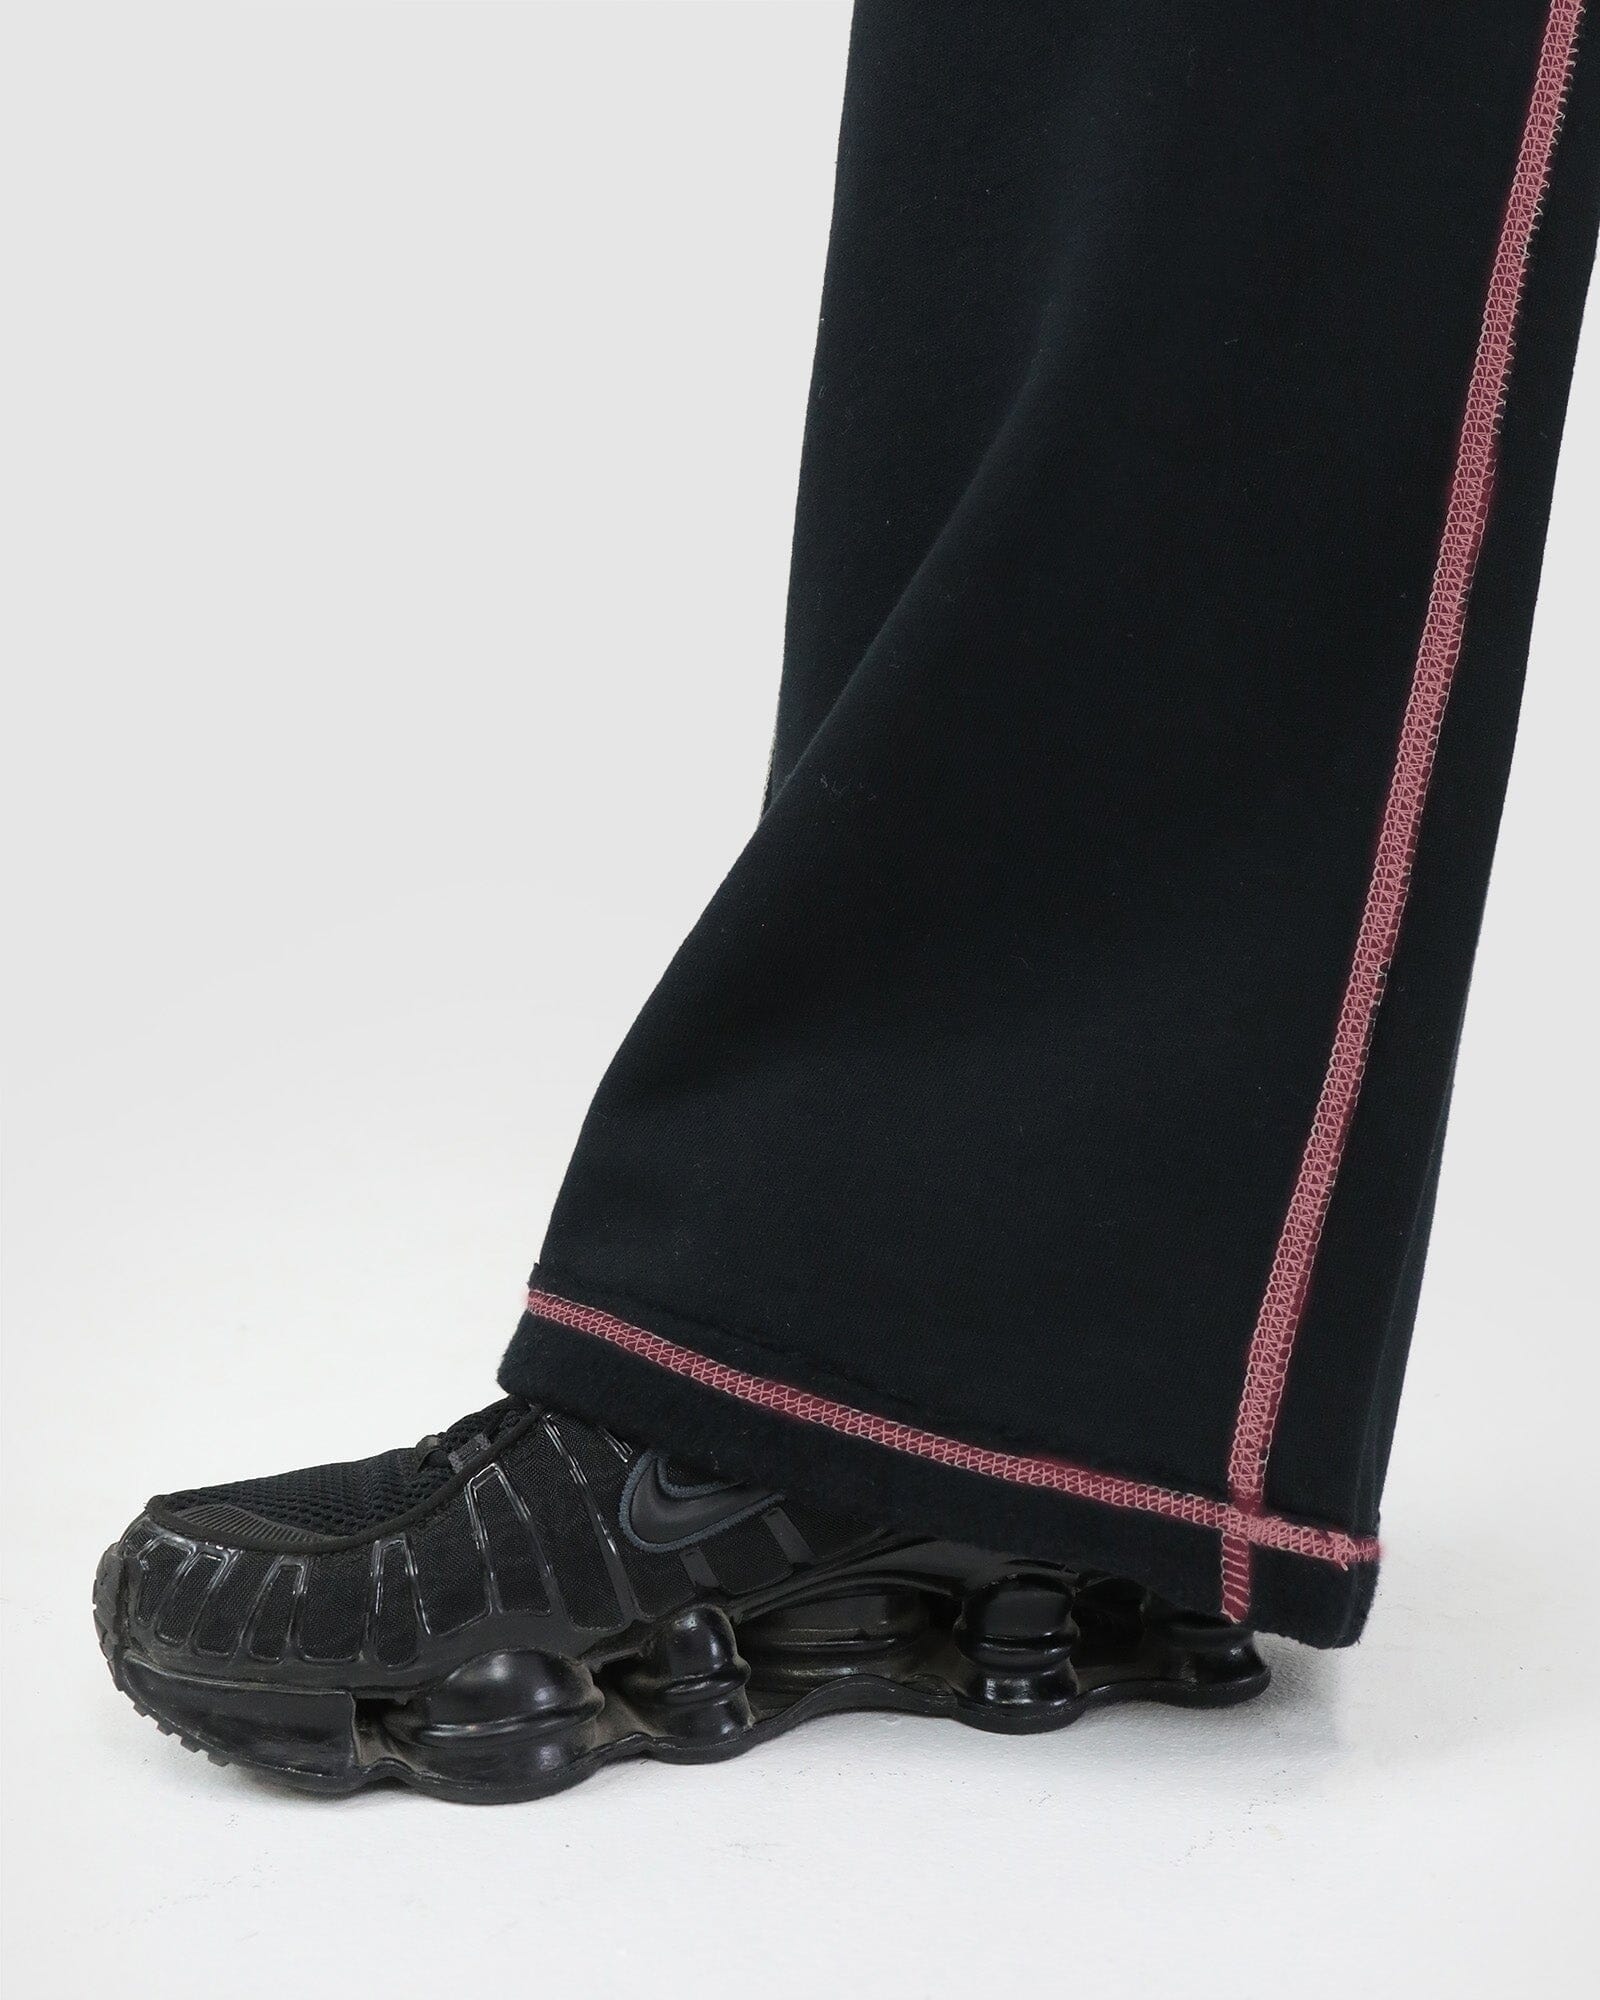 Reverse Track Pant: Black with Burgundy Stitching